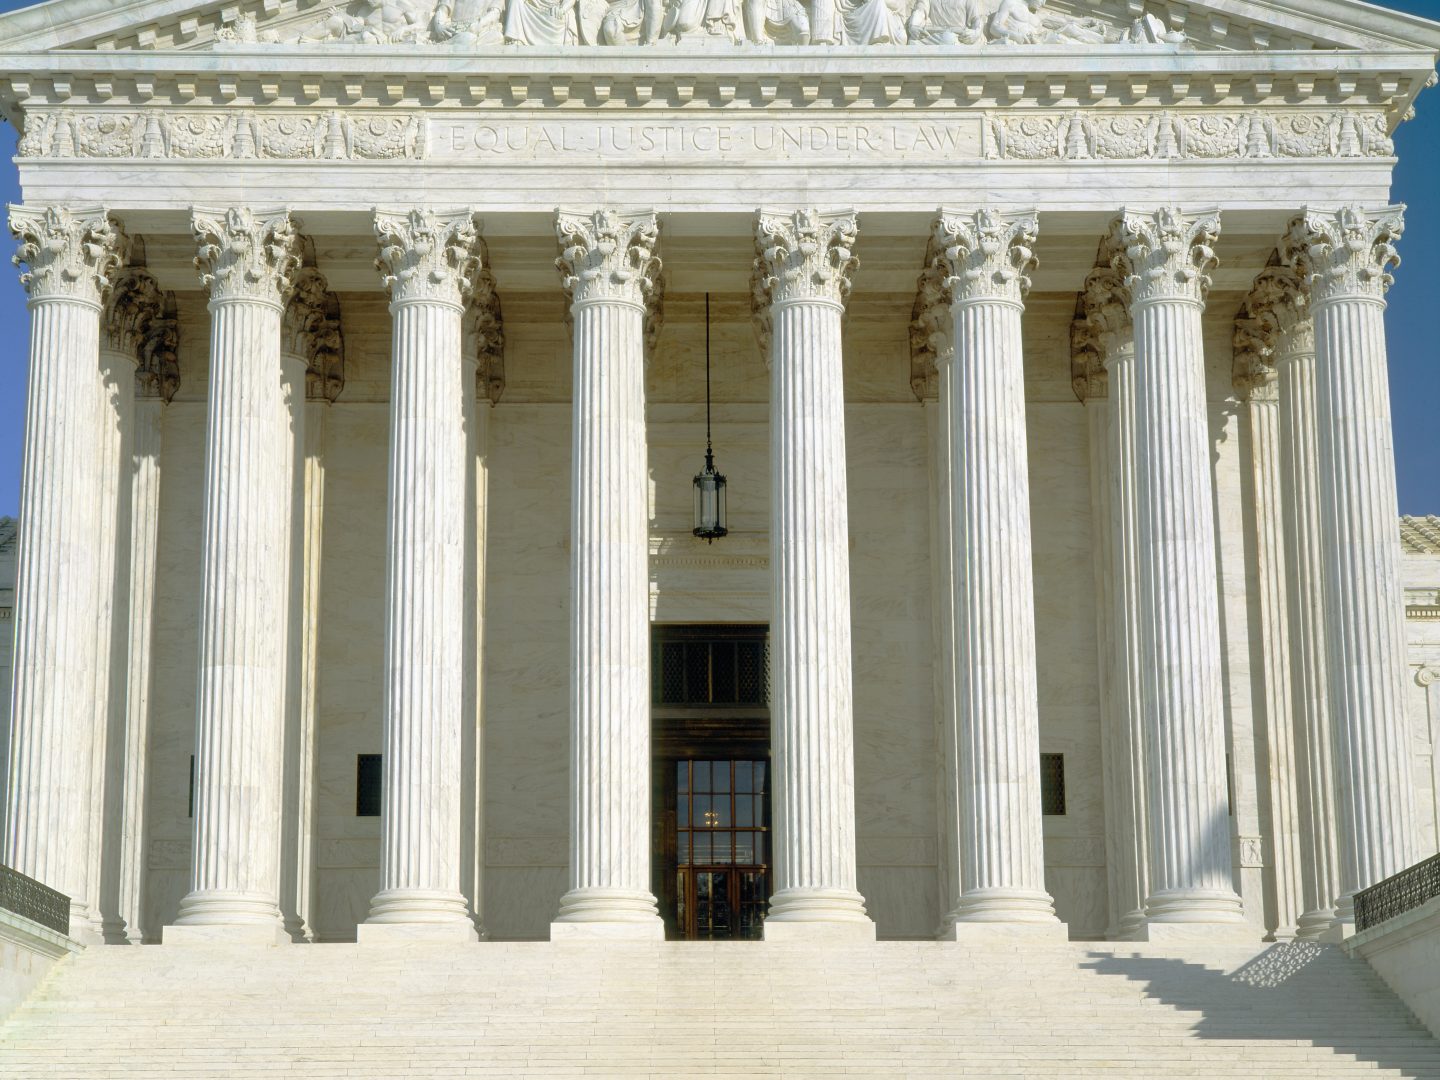 Front of US Supreme Court, Washington DC (Photo by: Joe Sohm/Visions of America/Universal Images Group via Getty Images)